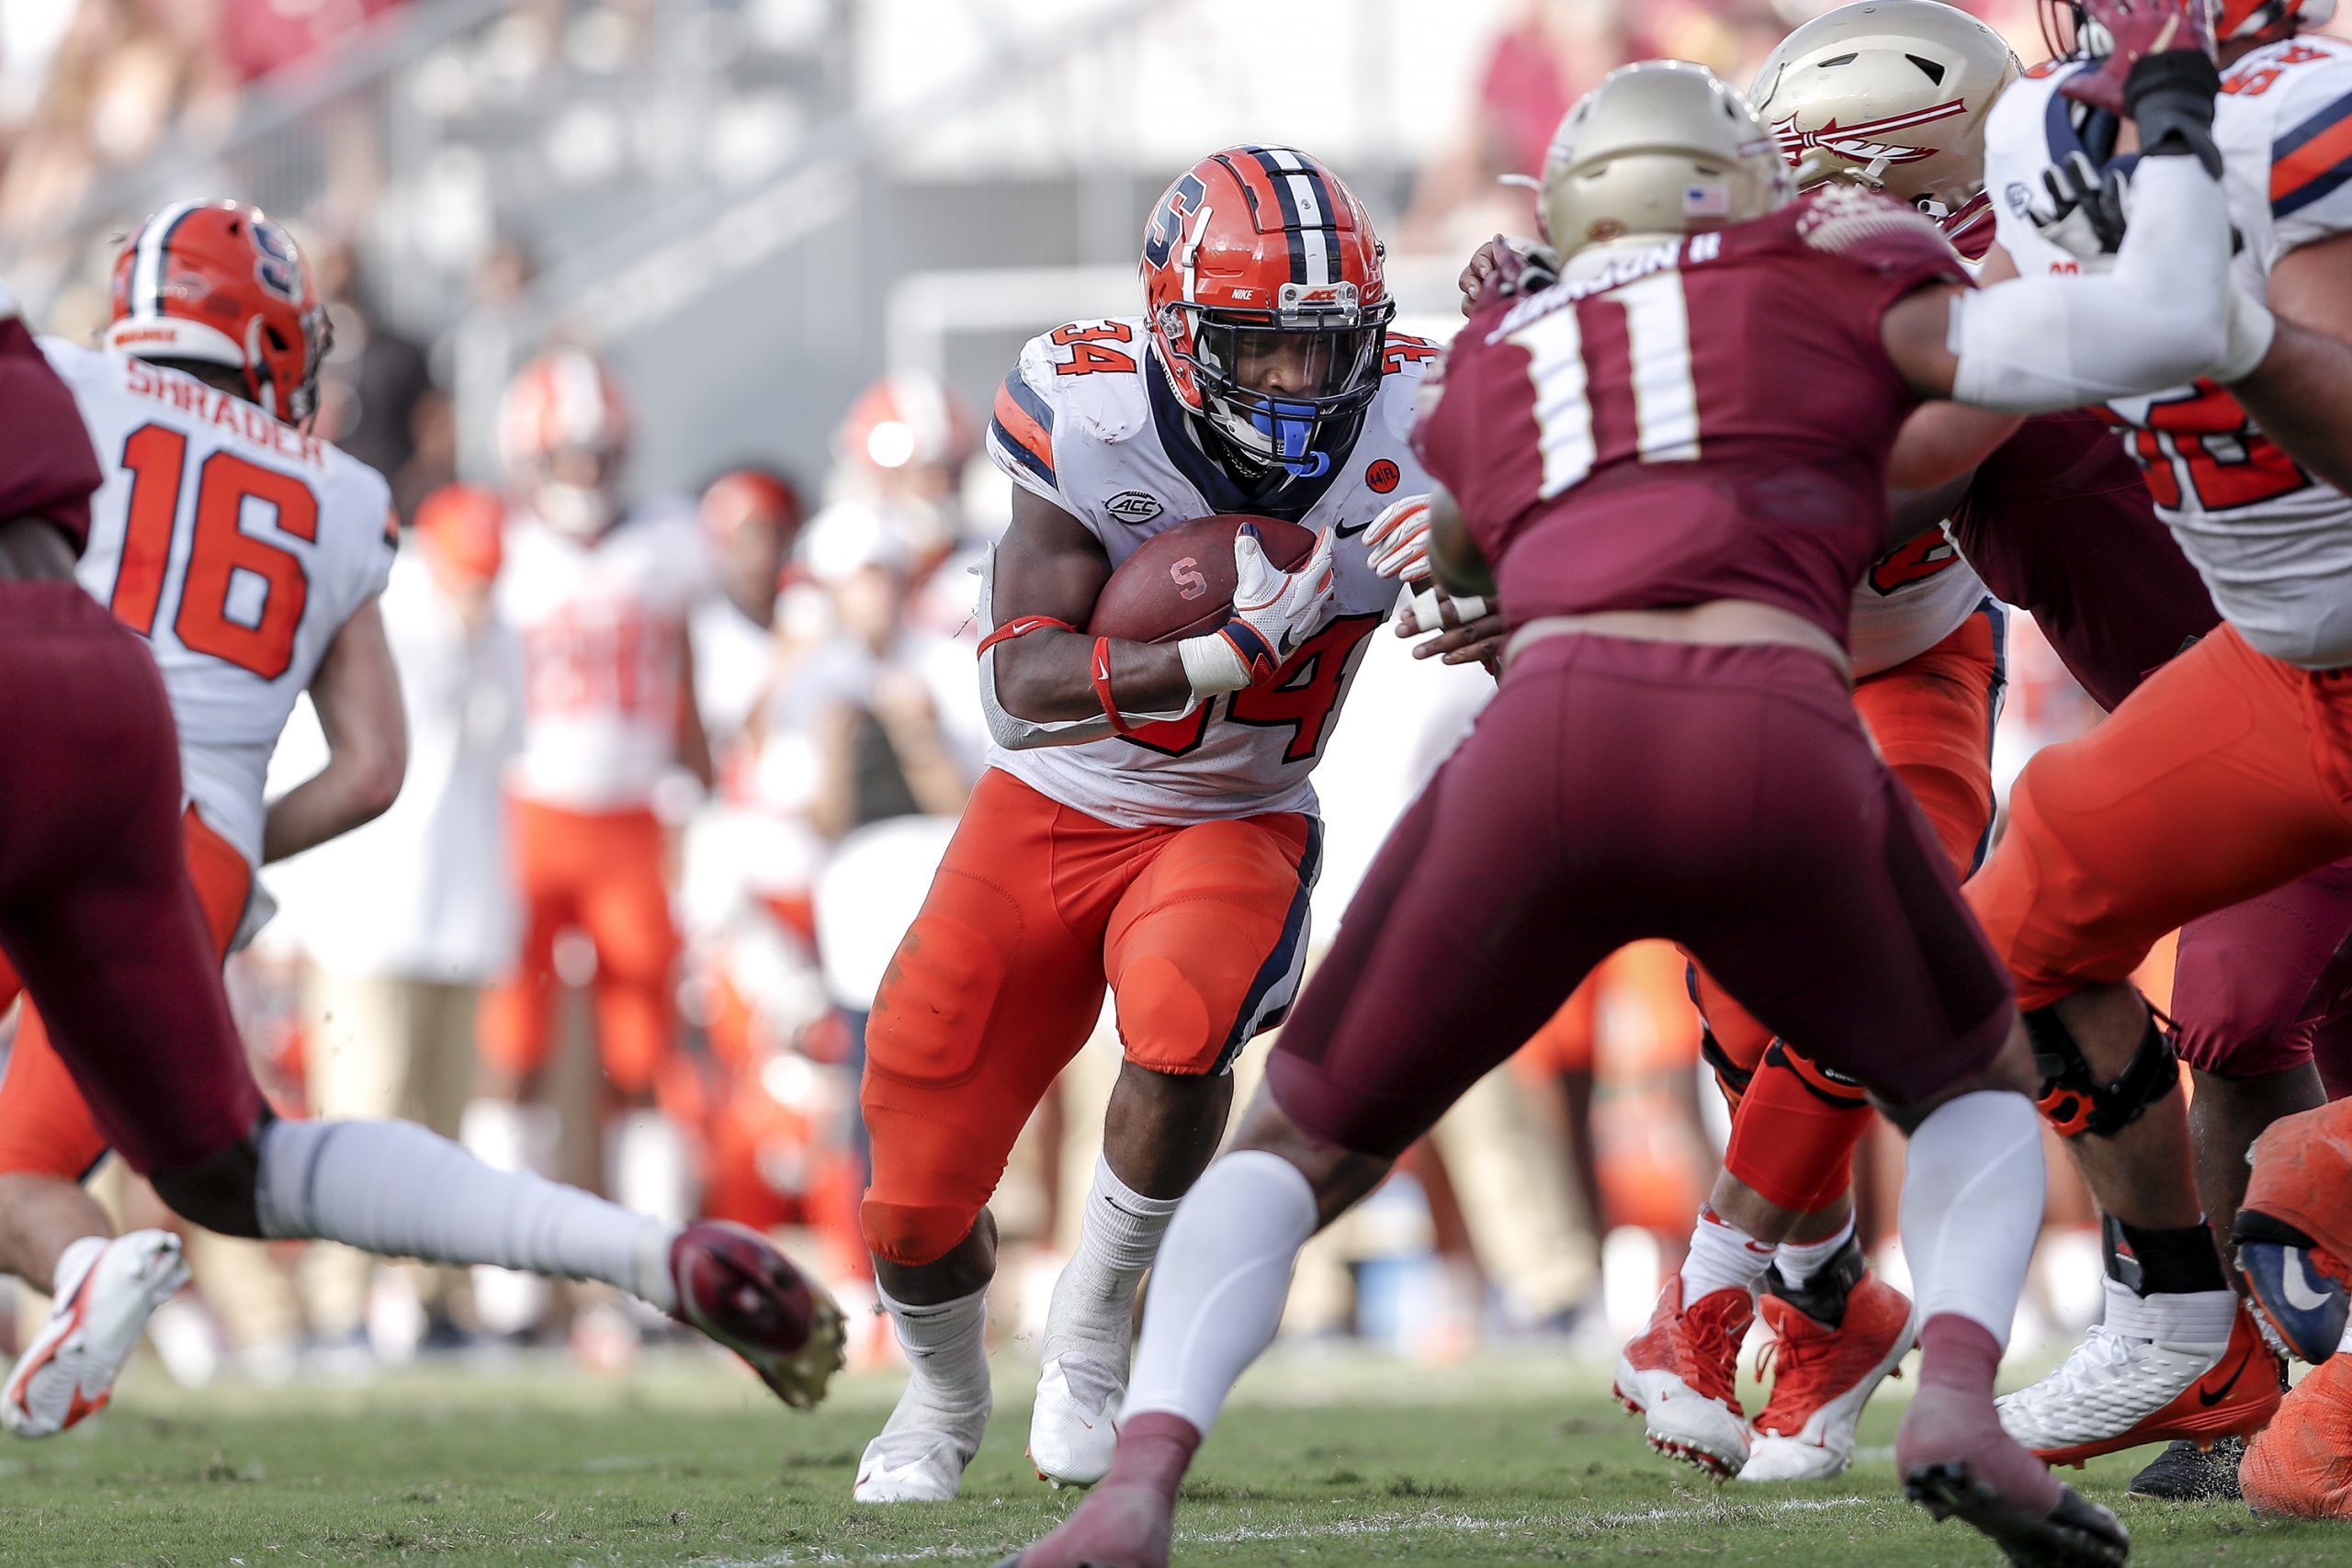 TALLAHASSEE, FL - OCTOBER 2: During the game with the Florida State Seminoles playing against the Syracuse Orange at Doak Campbell Stadium on Bobby Bowden Field on October 2, 2021 in Tallahassee, Florida. The Seminoles defeated the Orange 33 to 30. (Photo by Don Juan Moore/Character Lines)